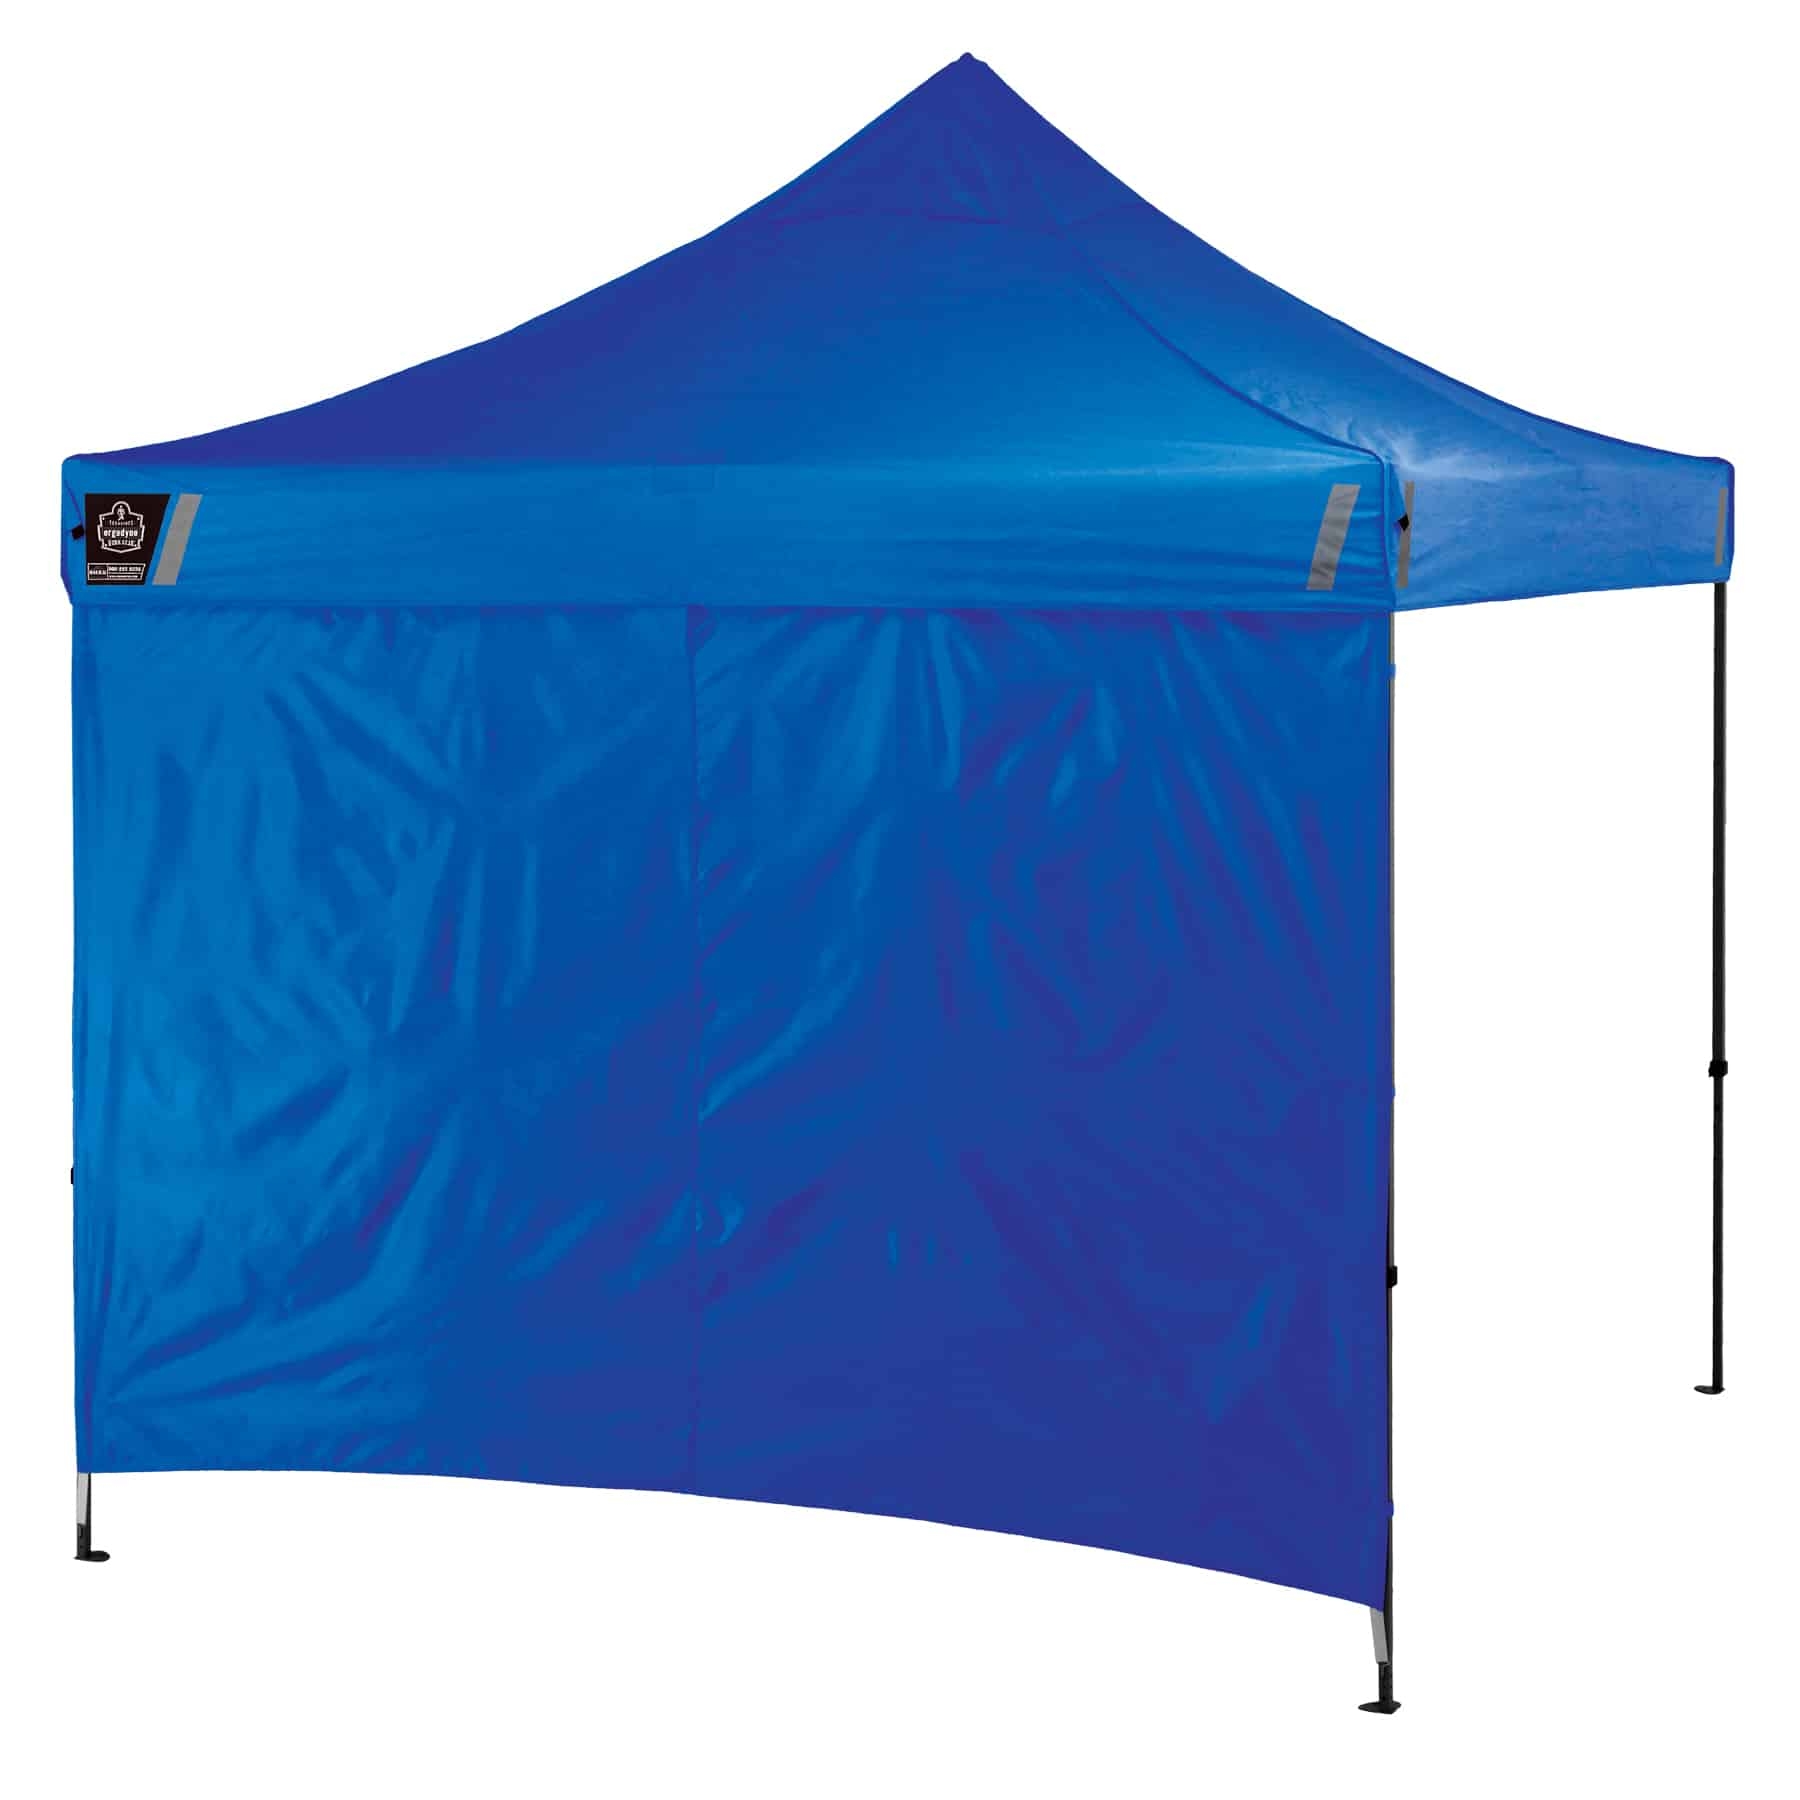 Ergodyne SHAX 6051 Heavy-Duty 10 Foot x 10 Foot Pop-Up Tent from Columbia Safety